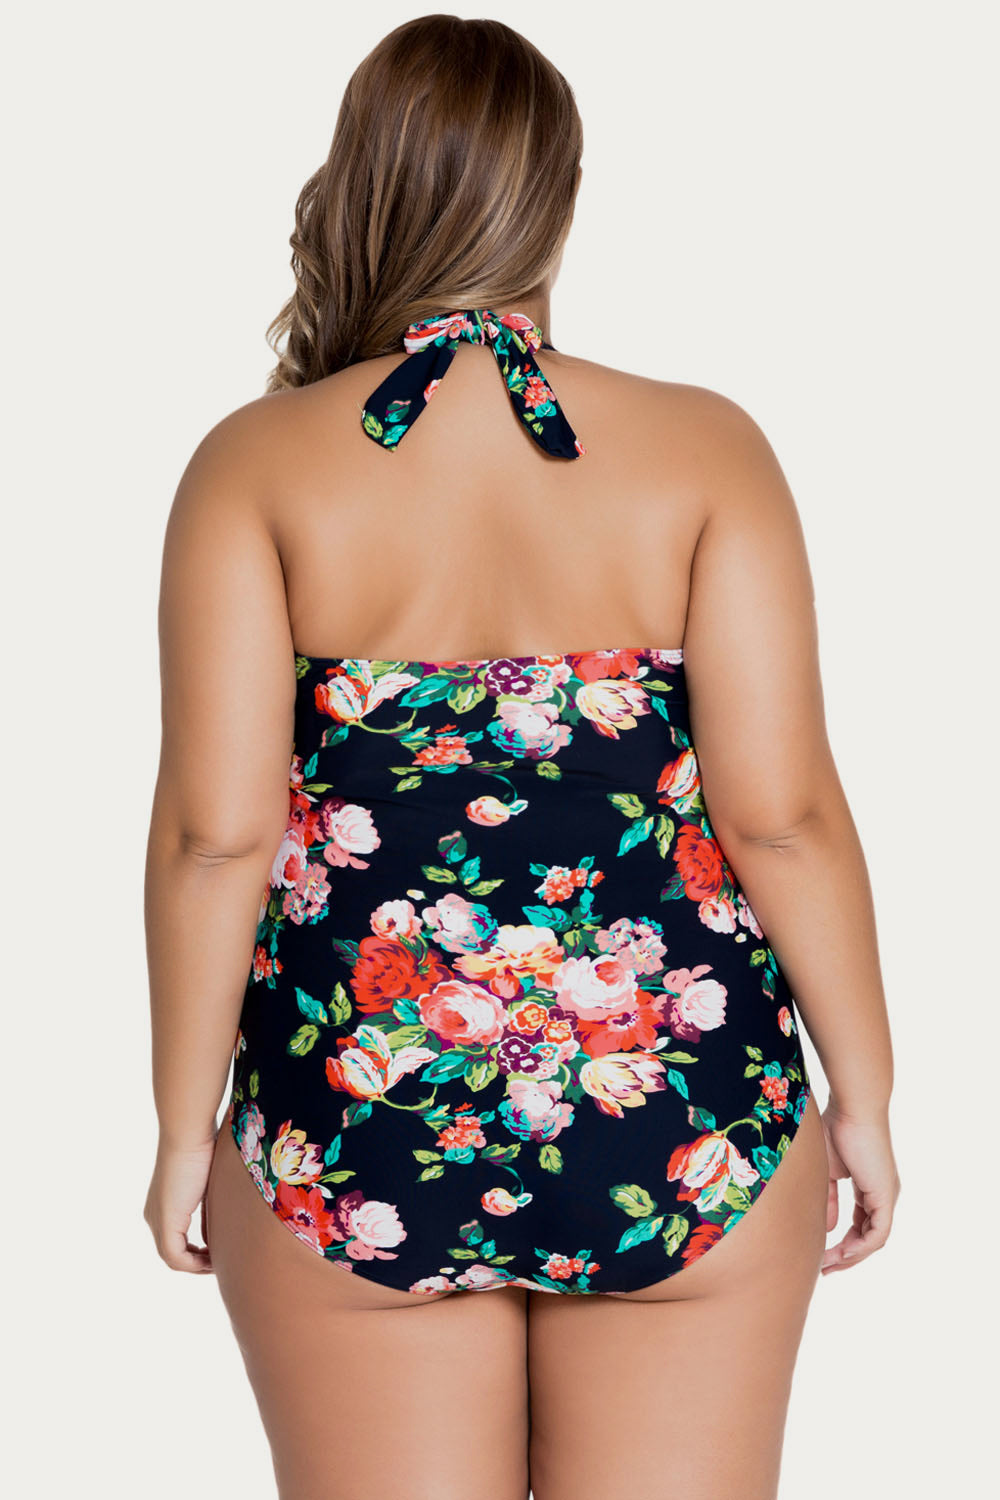 Floral Plus Halter Size Maillot - Keene's